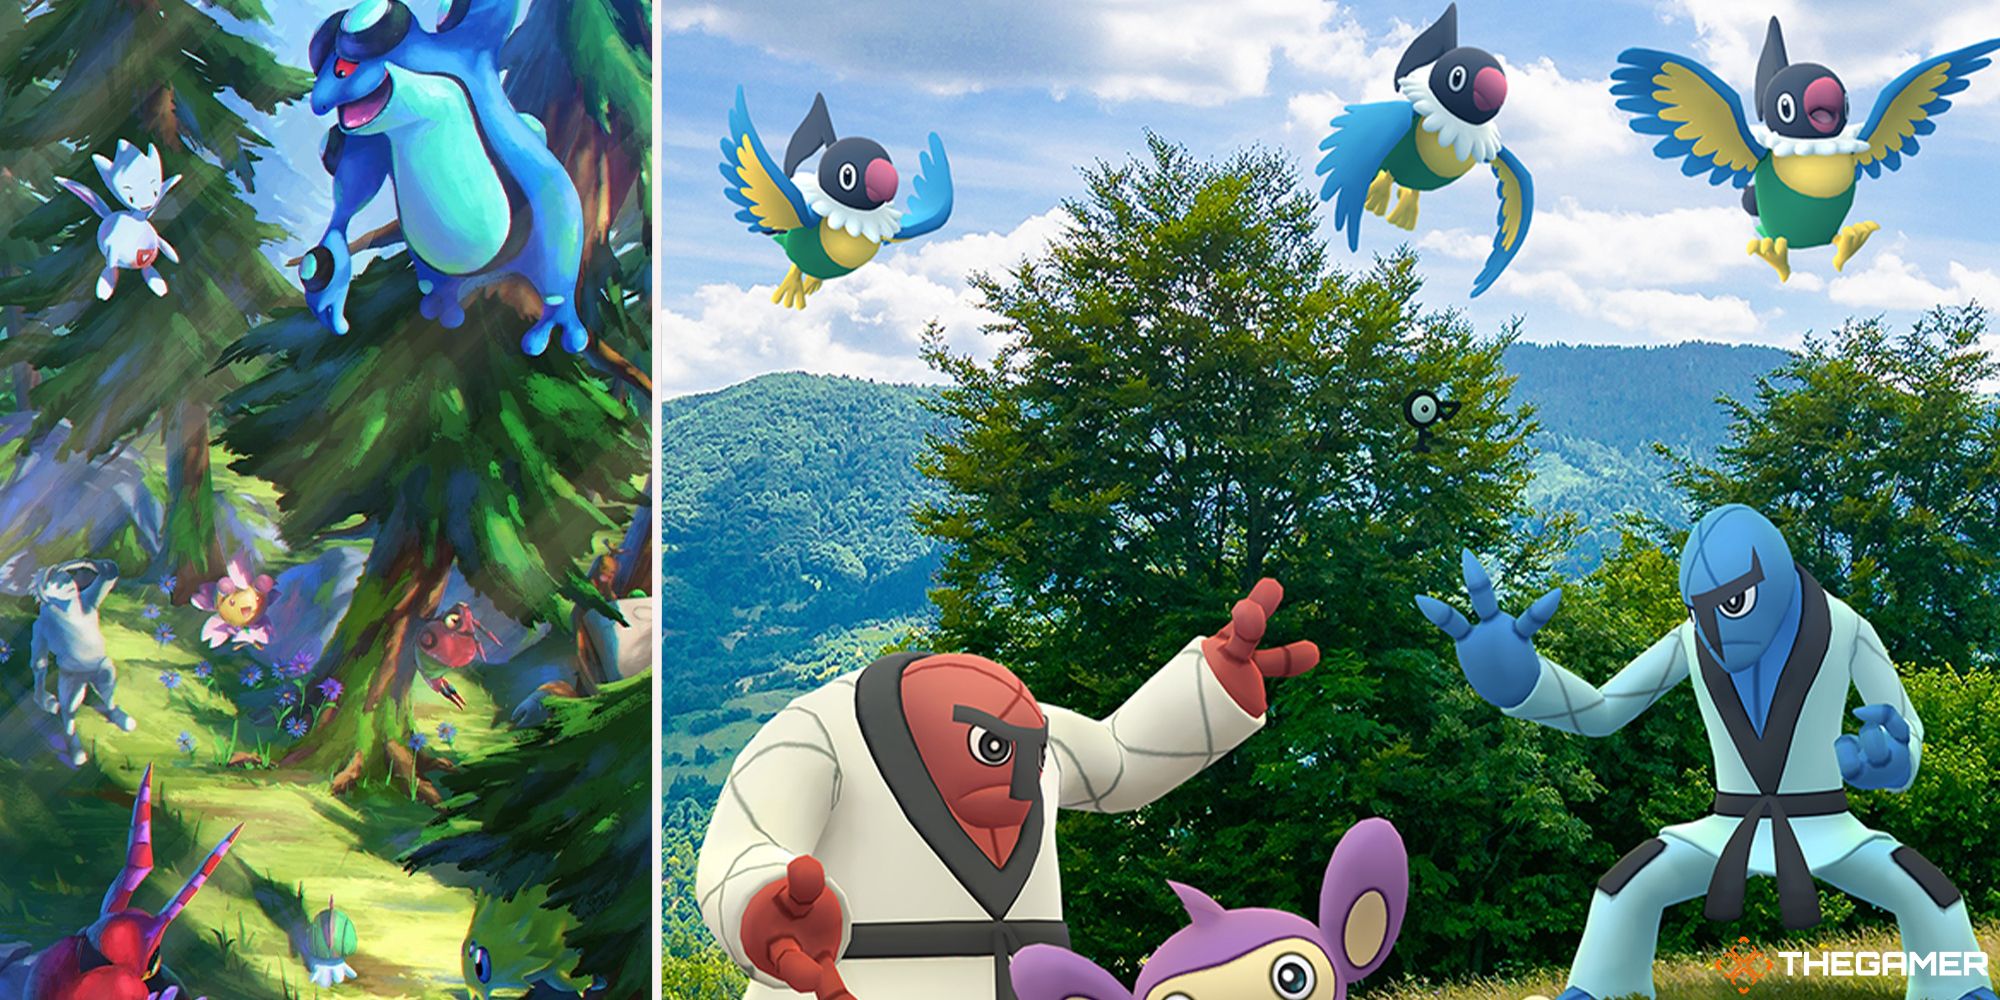 The Rarest Pokemon in Pokemon GO And How To Find Them